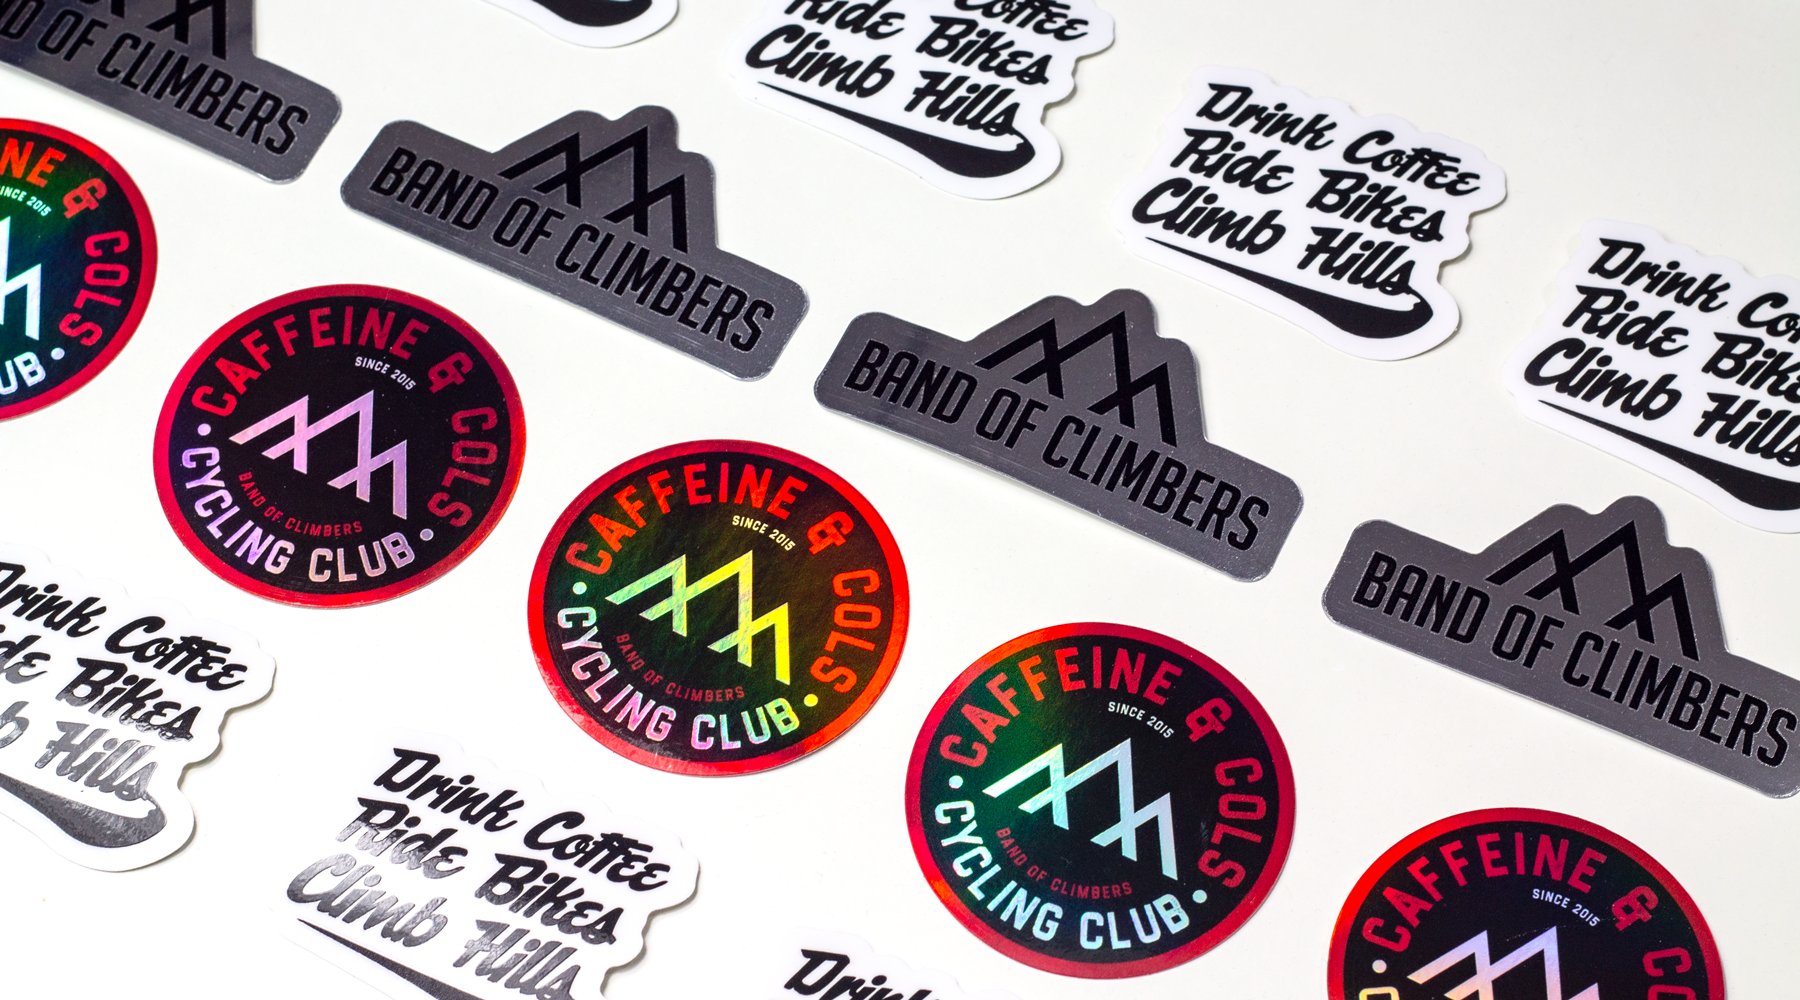 Band of Climbers Stickers